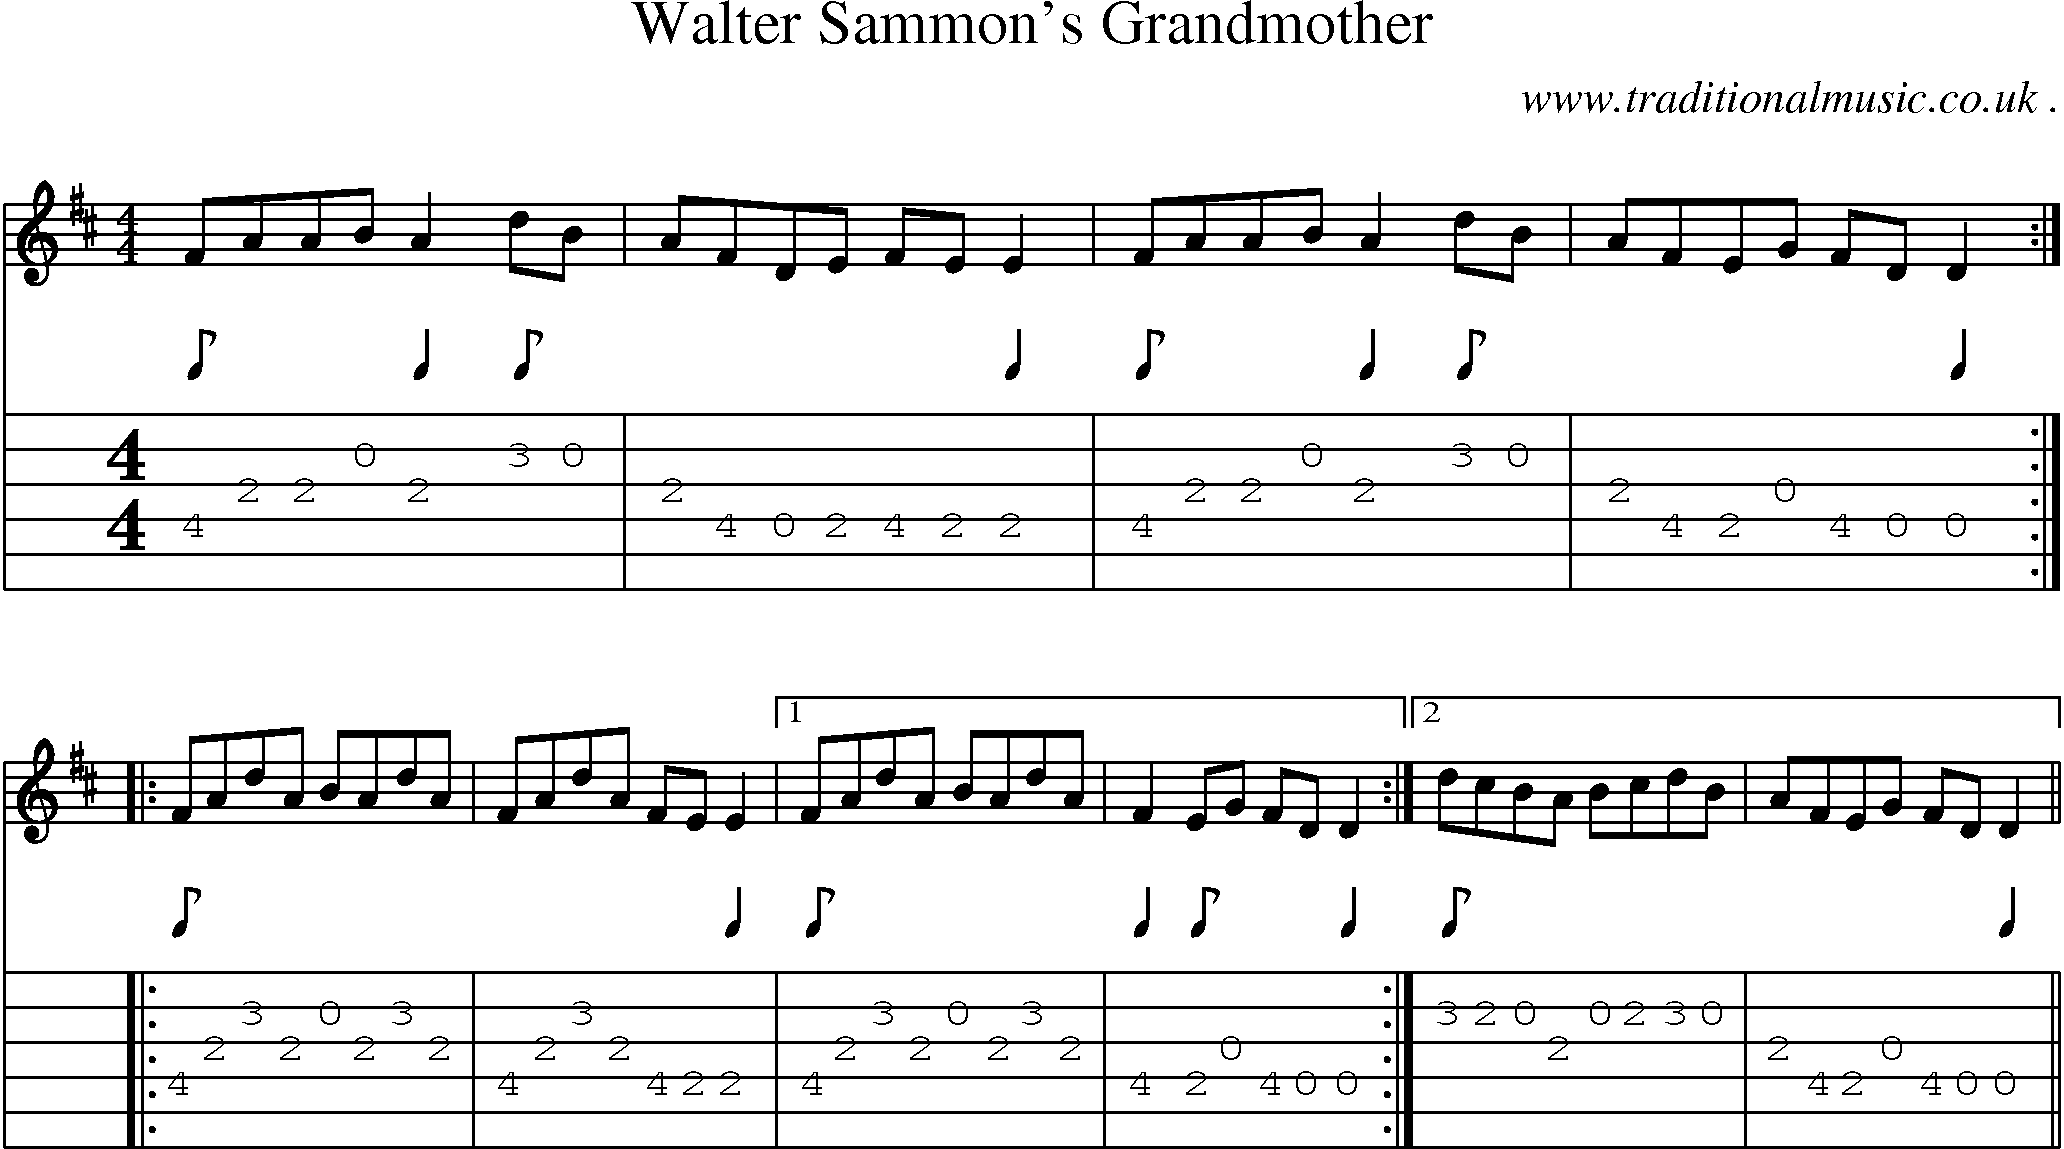 Sheet-Music and Guitar Tabs for Walter Sammons Grandmother